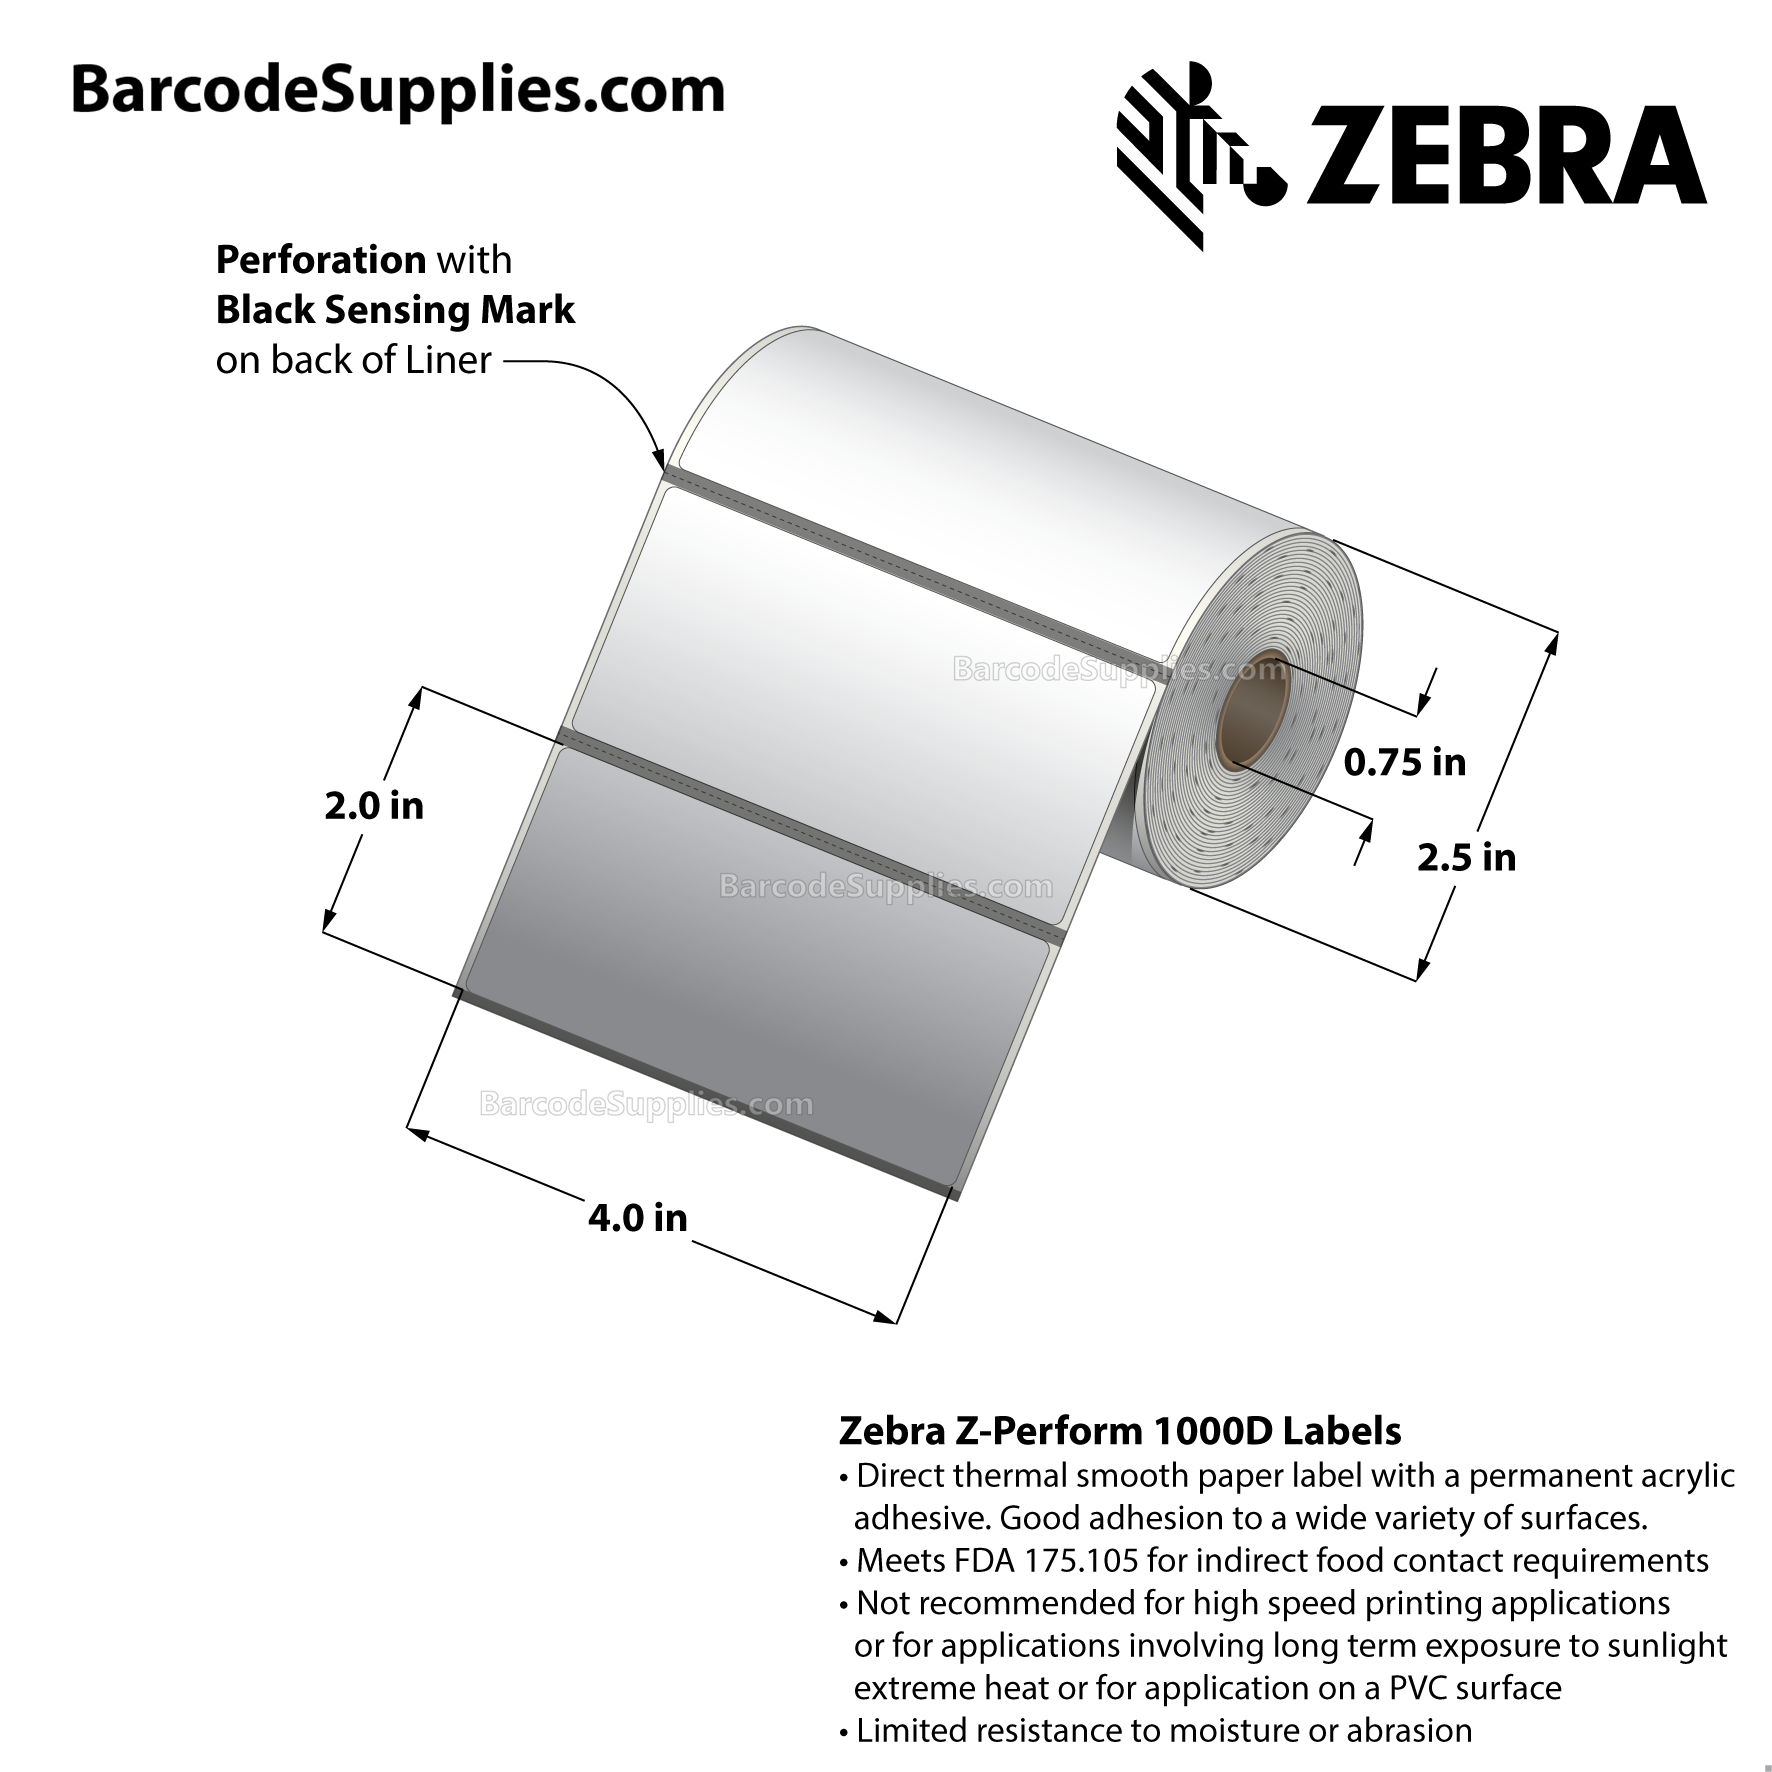 4 x 2 Direct Thermal White Z-Perform 1000D Labels With Permanent Adhesive - Black mark sensing - Perforated - 300 Labels Per Roll - Carton Of 36 Rolls - 10800 Labels Total - MPN: LD-R2AQ5J